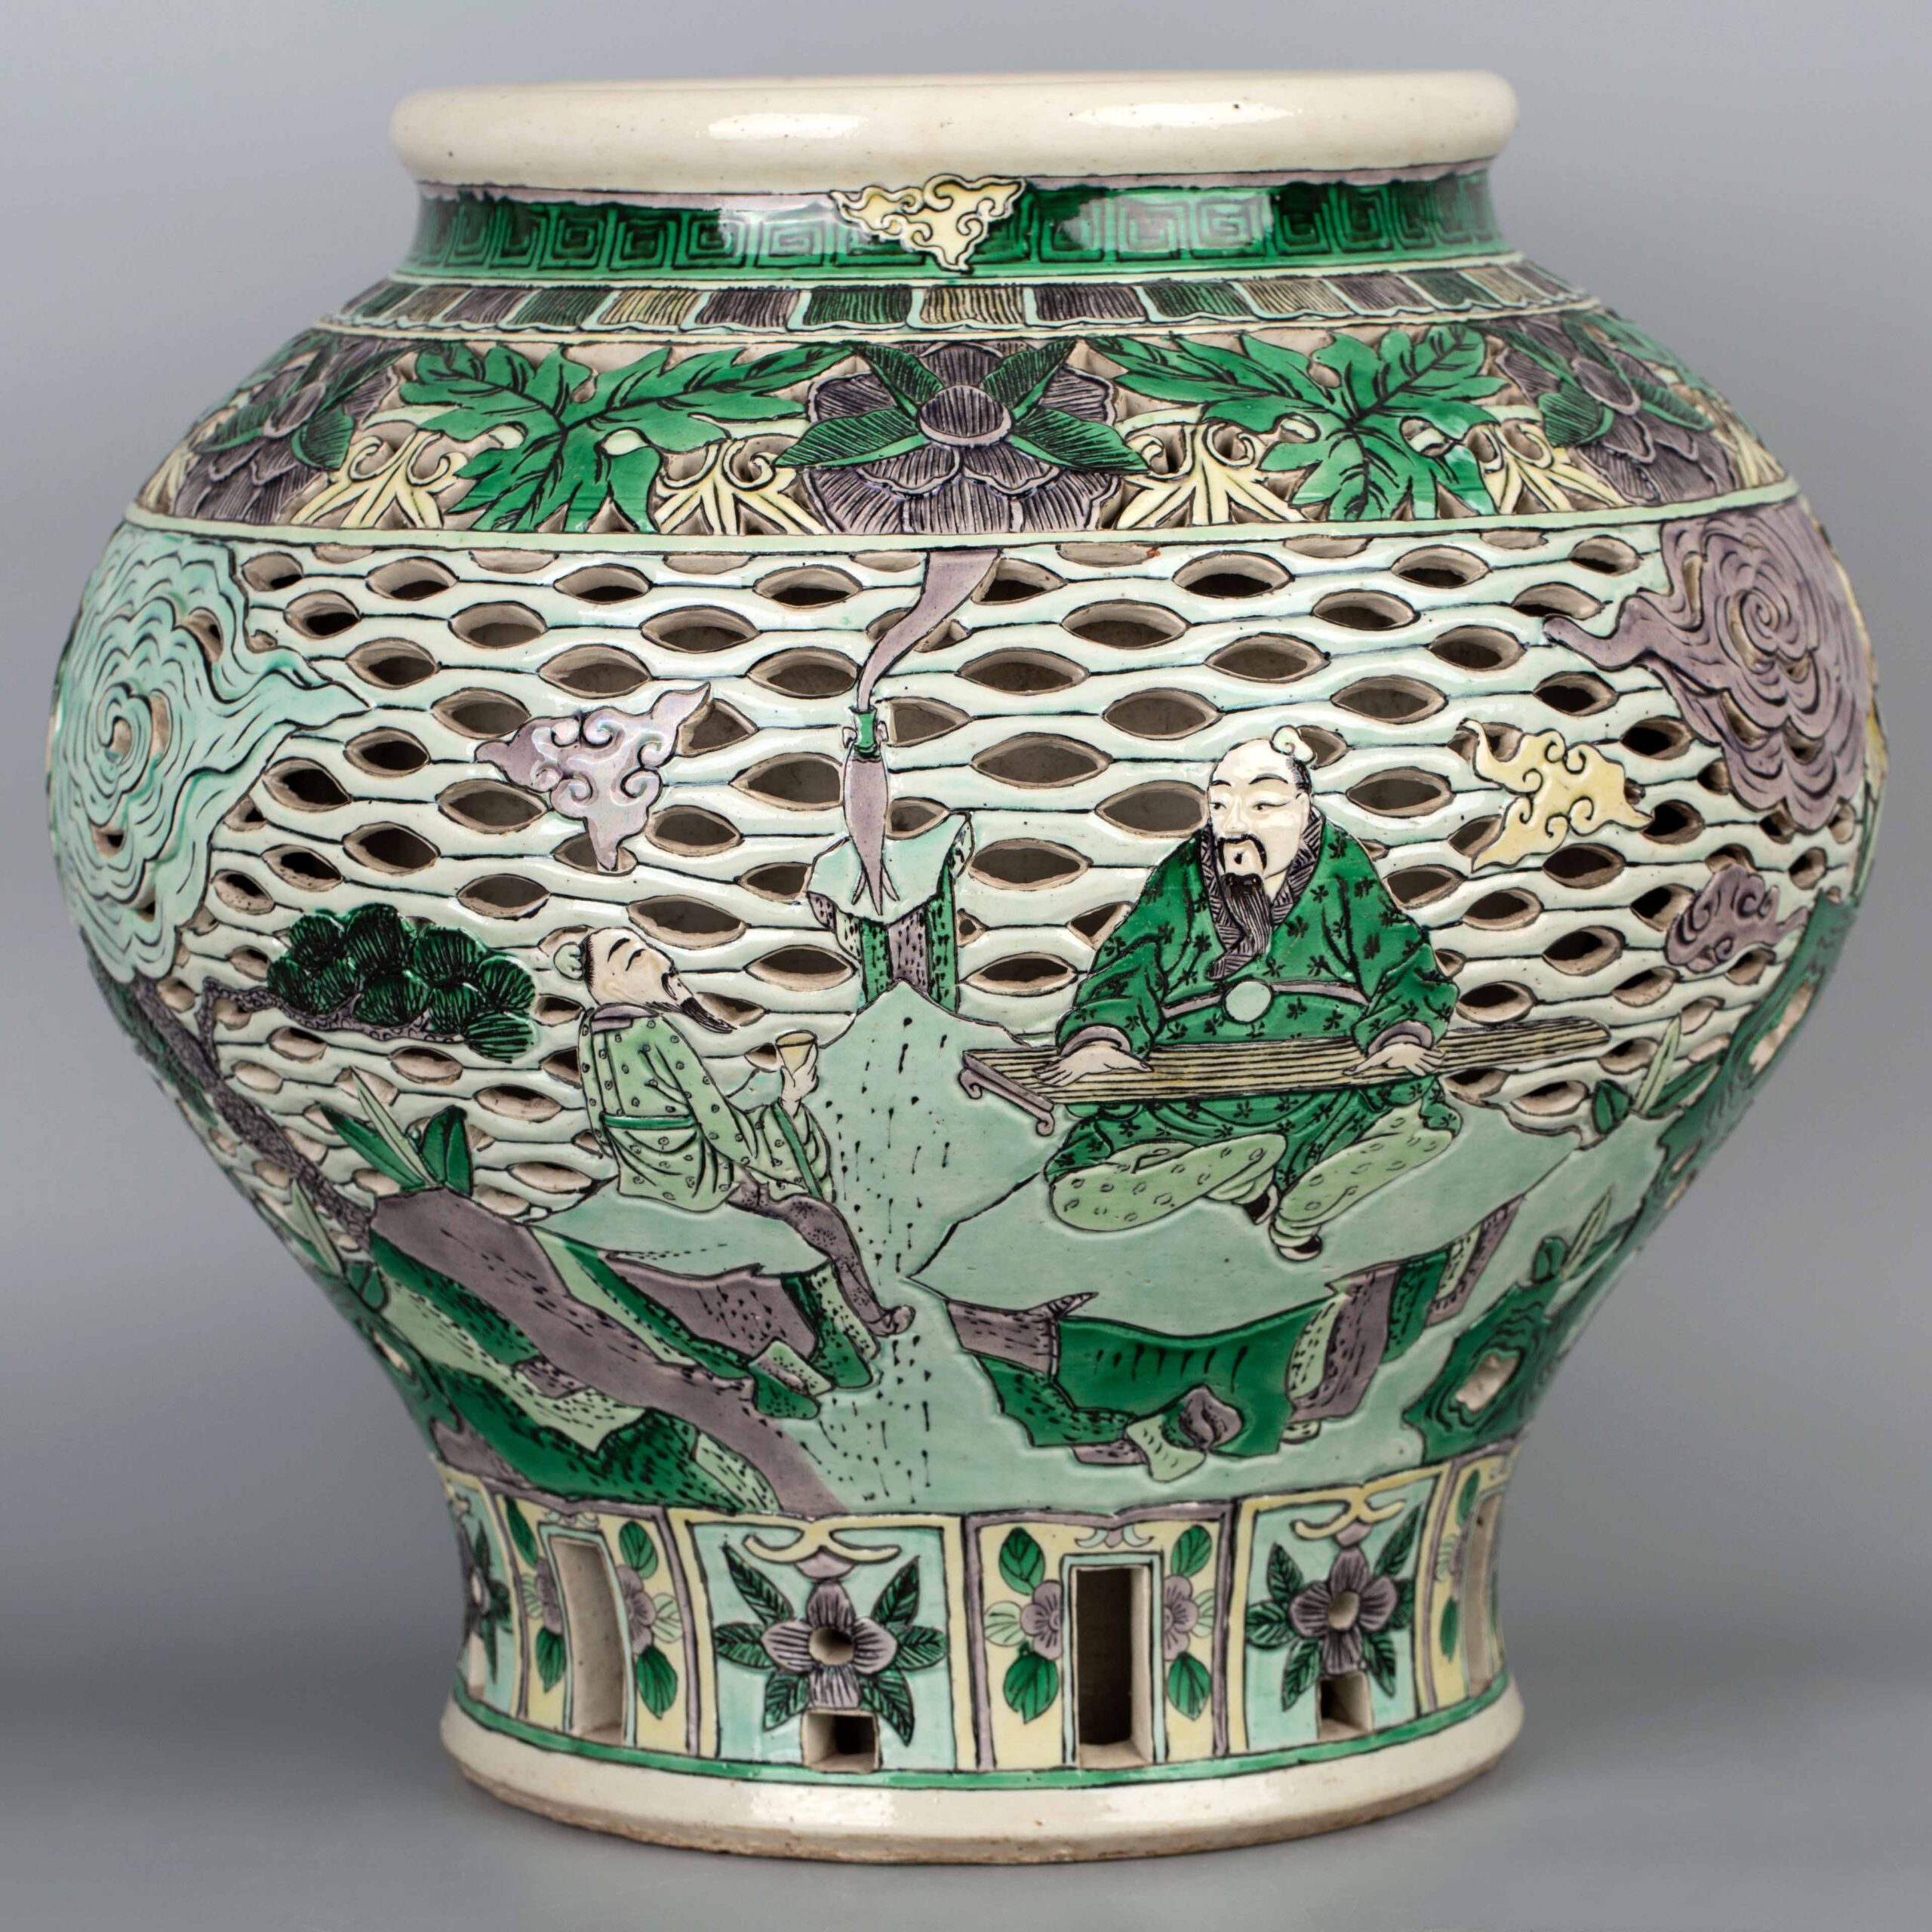 Multicolored hollow carved Jar 19th century五彩洞石，高士，镂空雕 